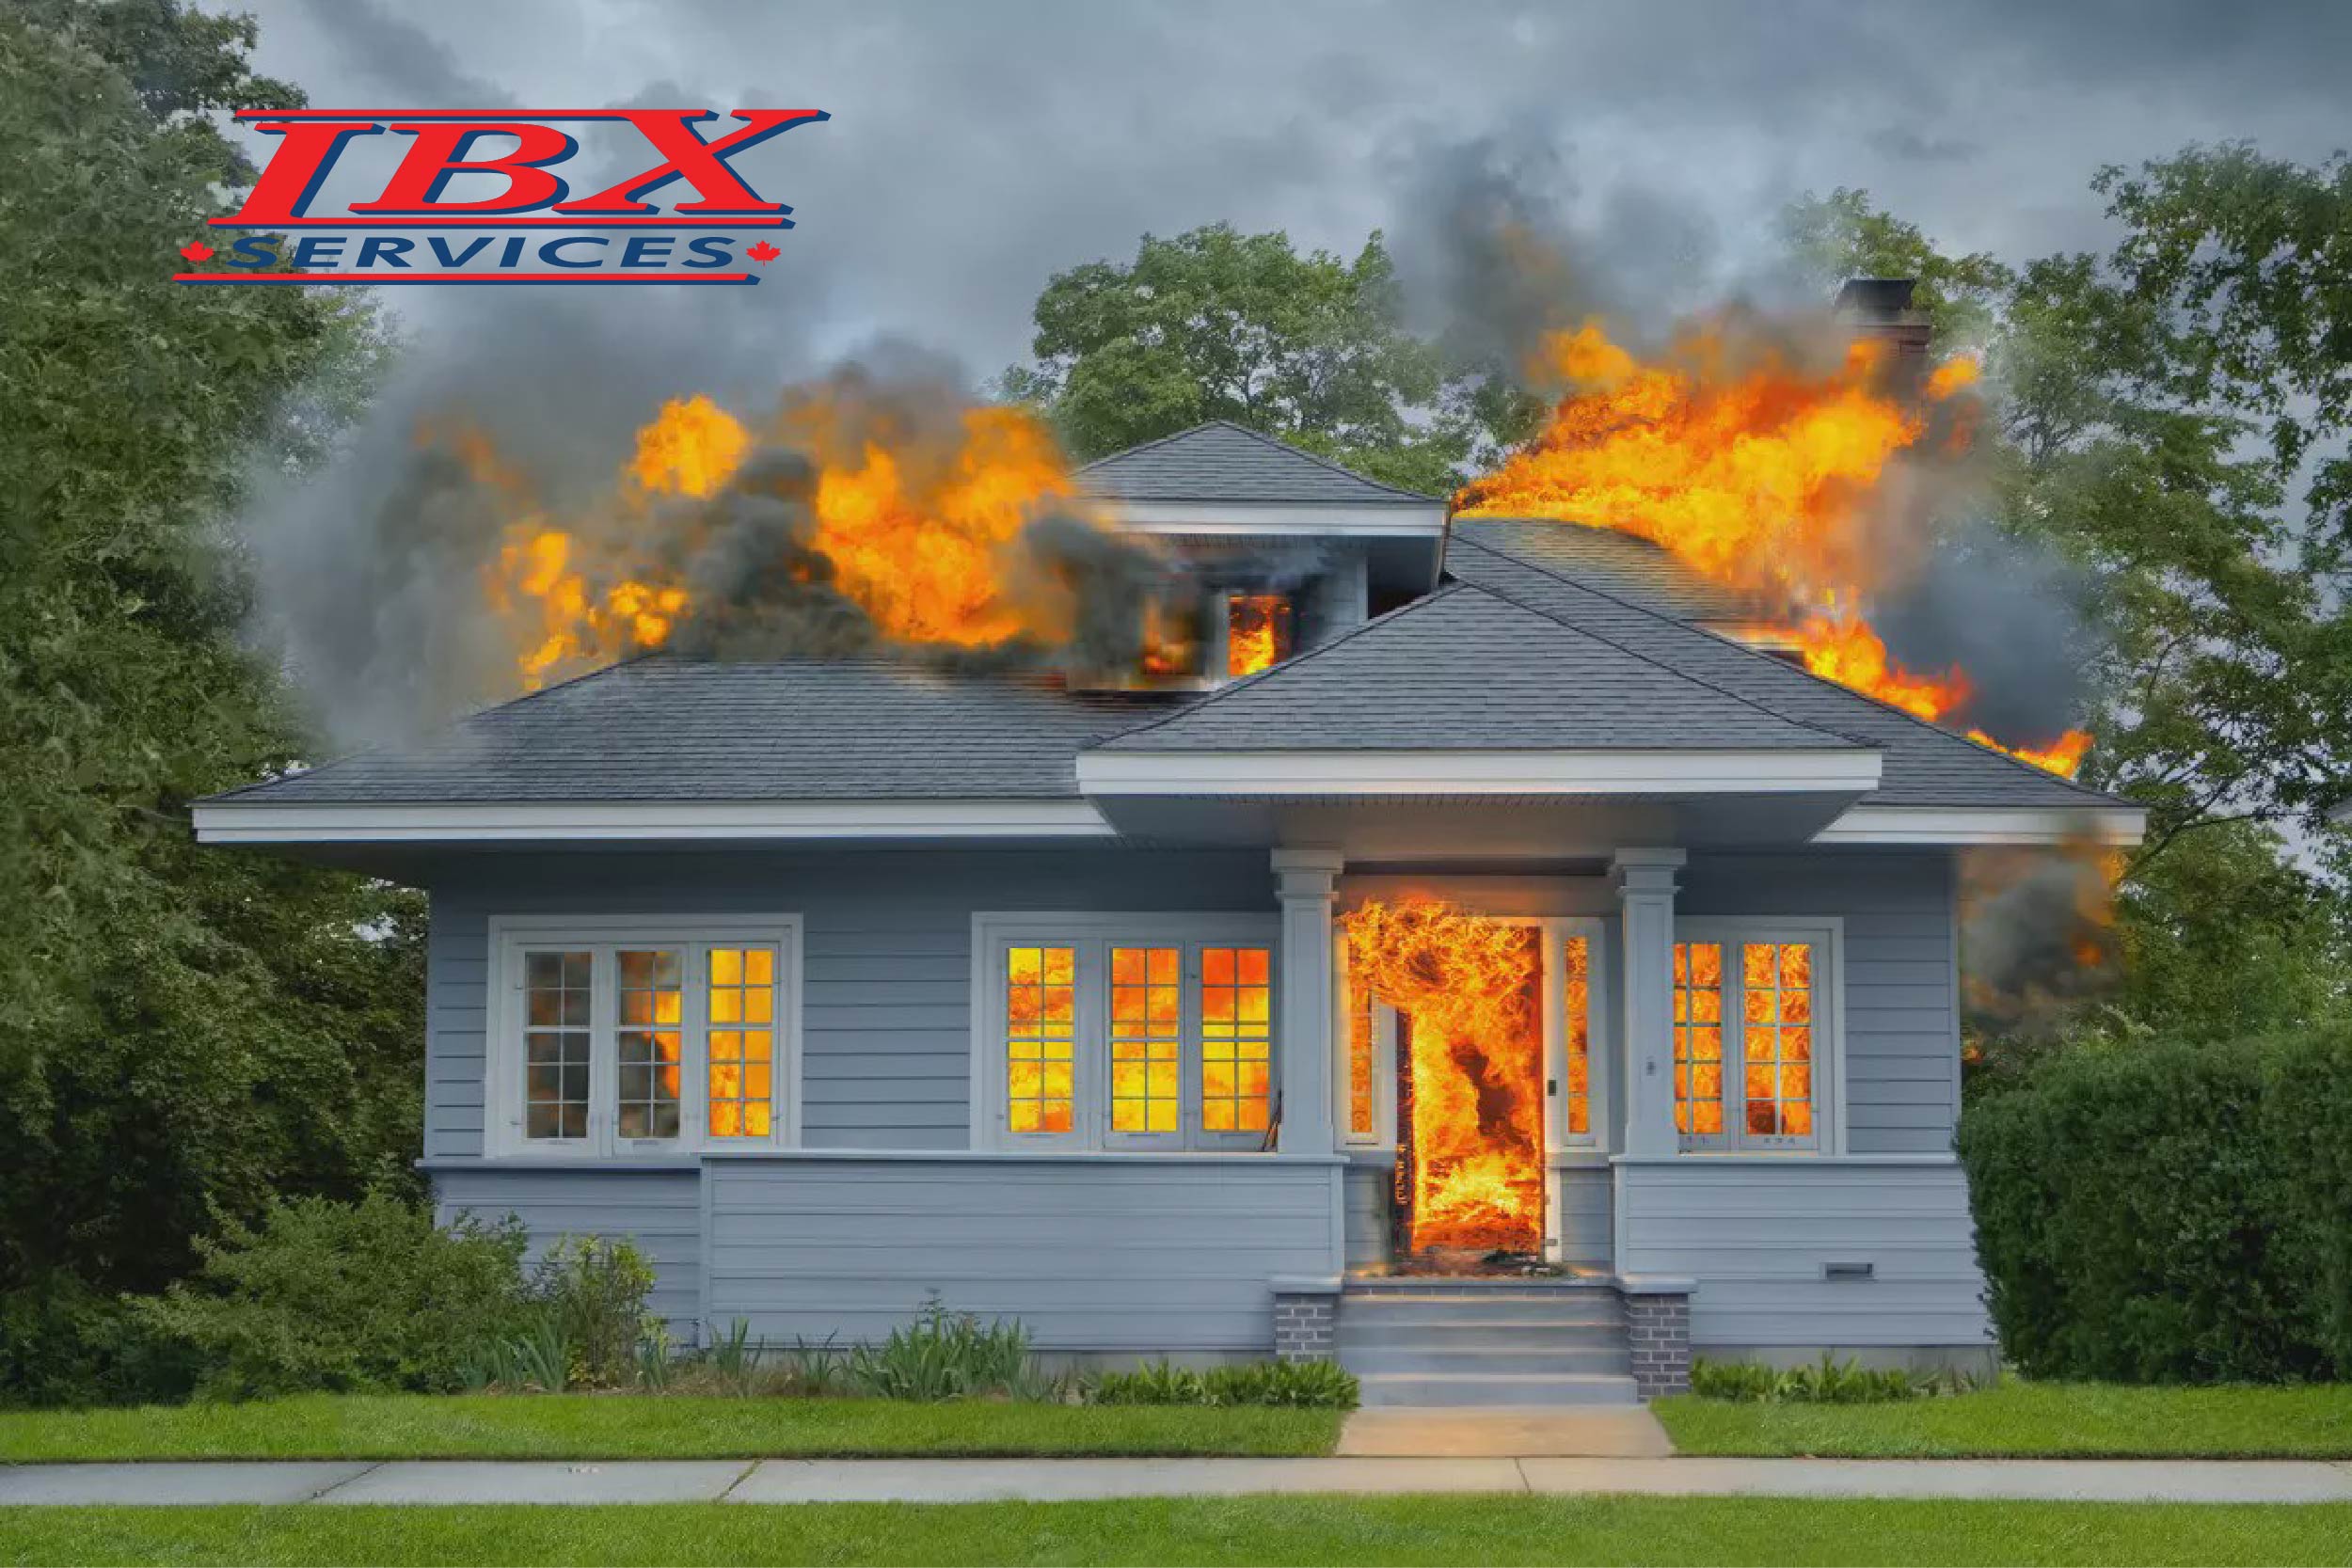 Clean Up A Fire Damaged House | IBX Services